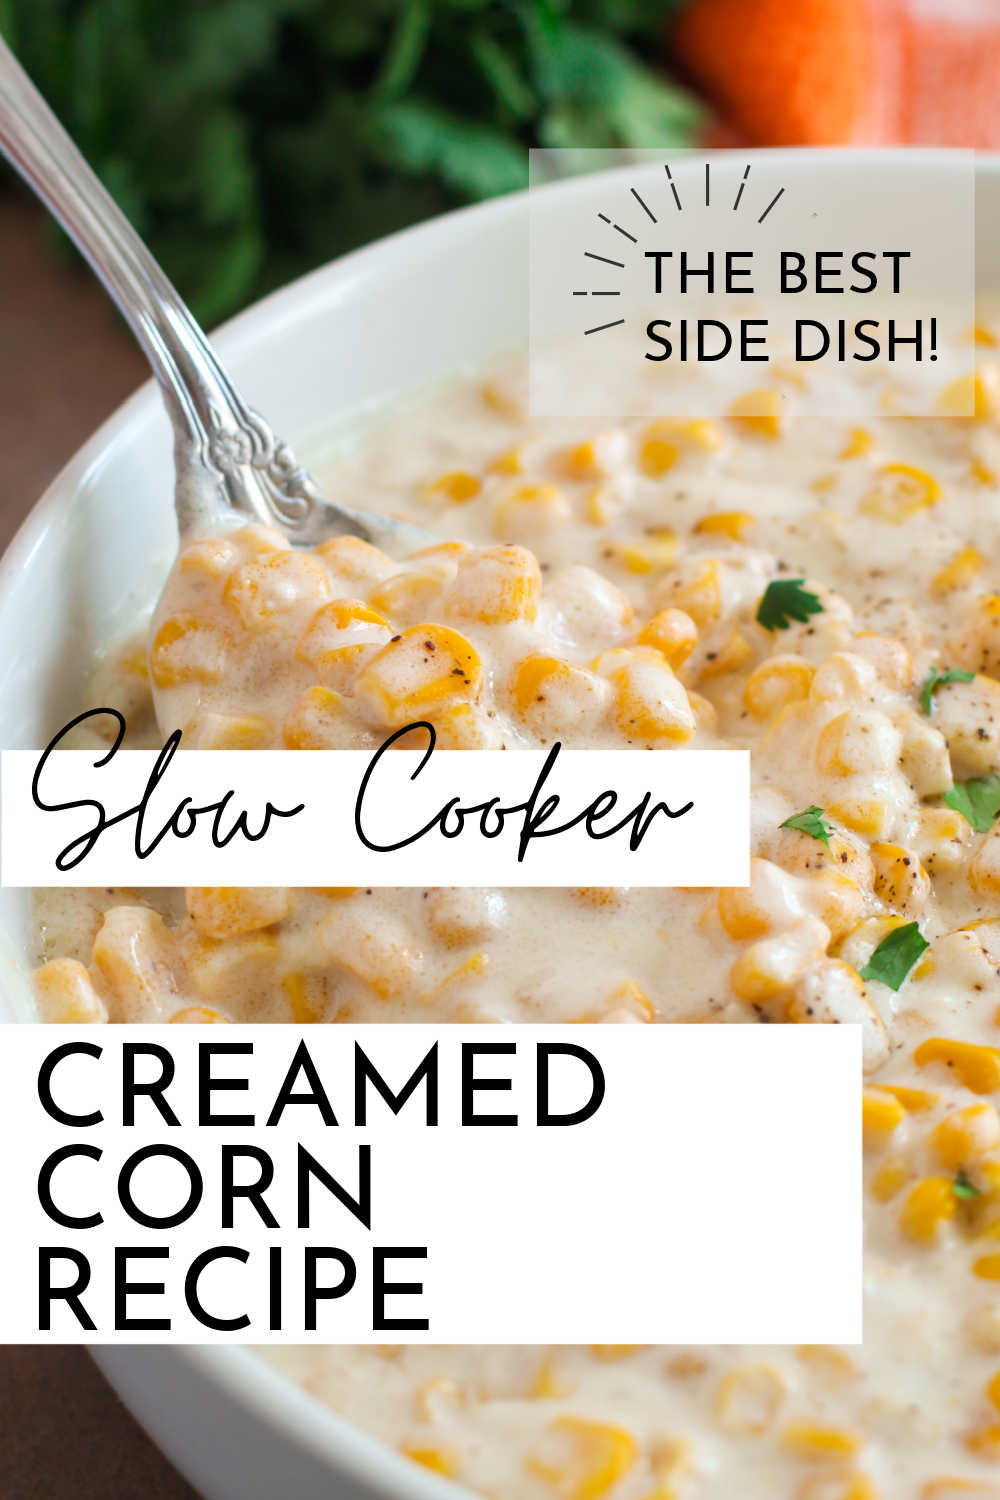 Pin image: creamed corn with "slow cooker creamed corn recipe: the best side dish".